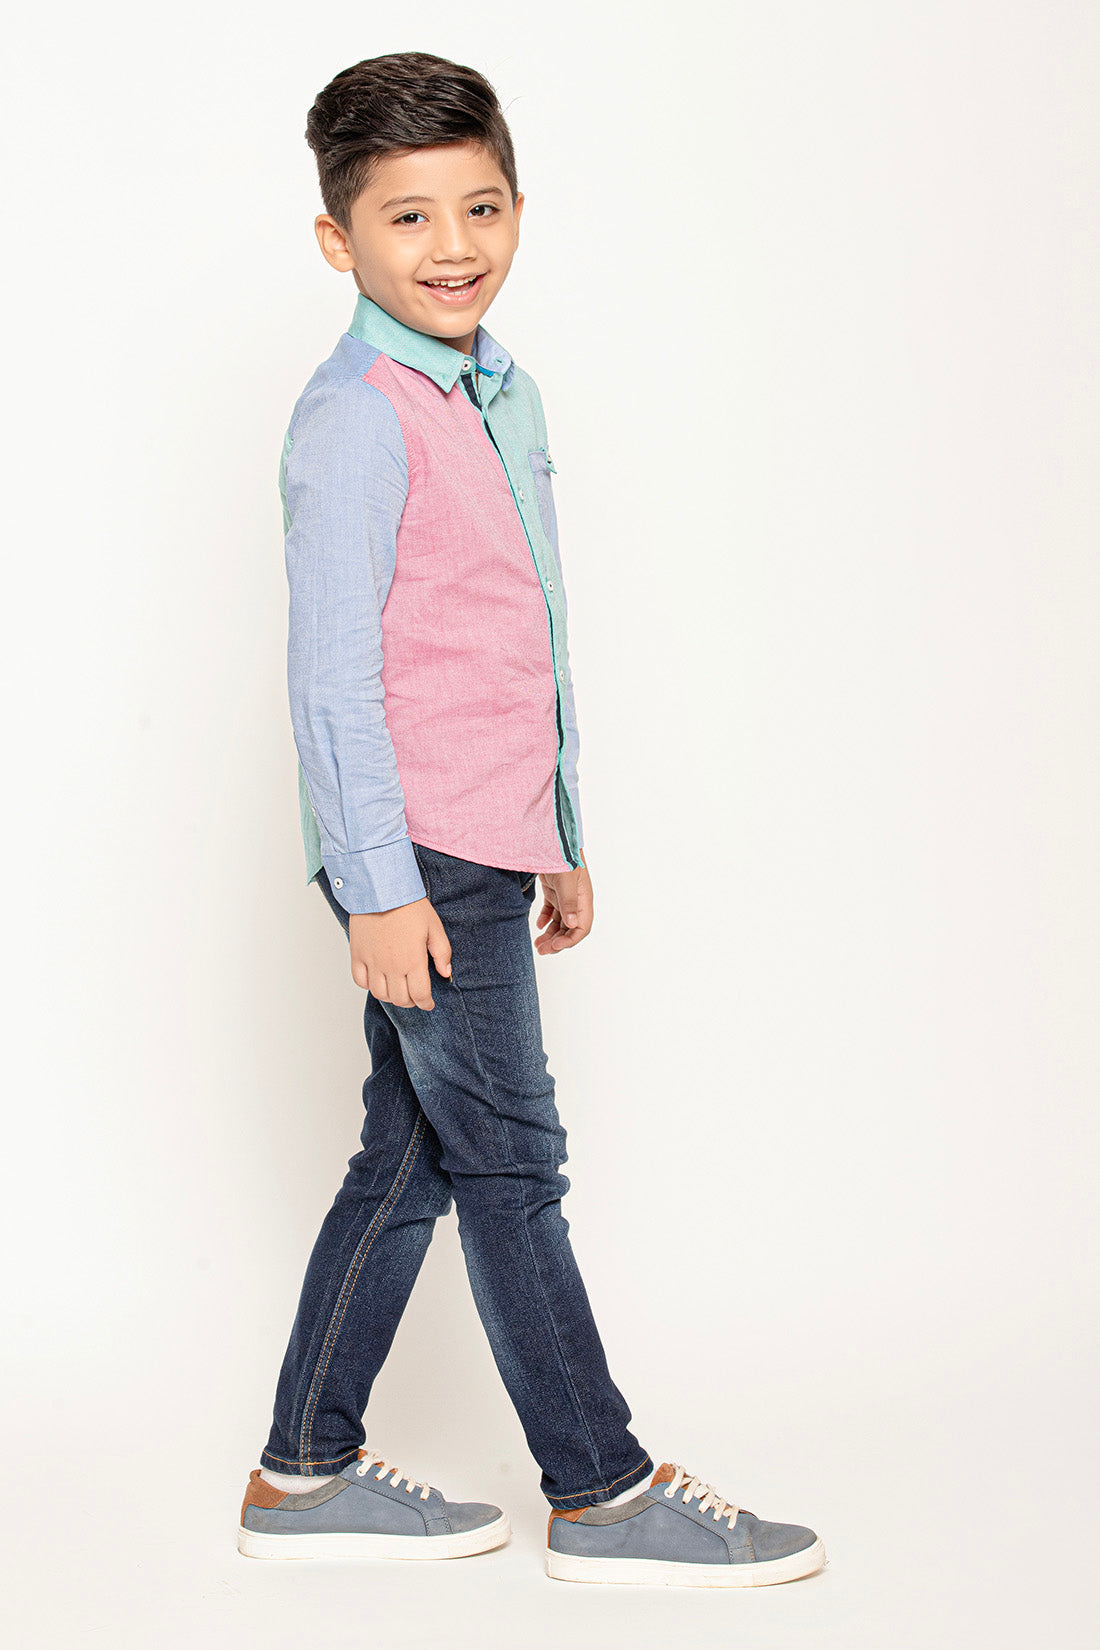 One Friday Varsity Chic Dual-Colored Blue and Pink Full Sleeves Shirt for Boys